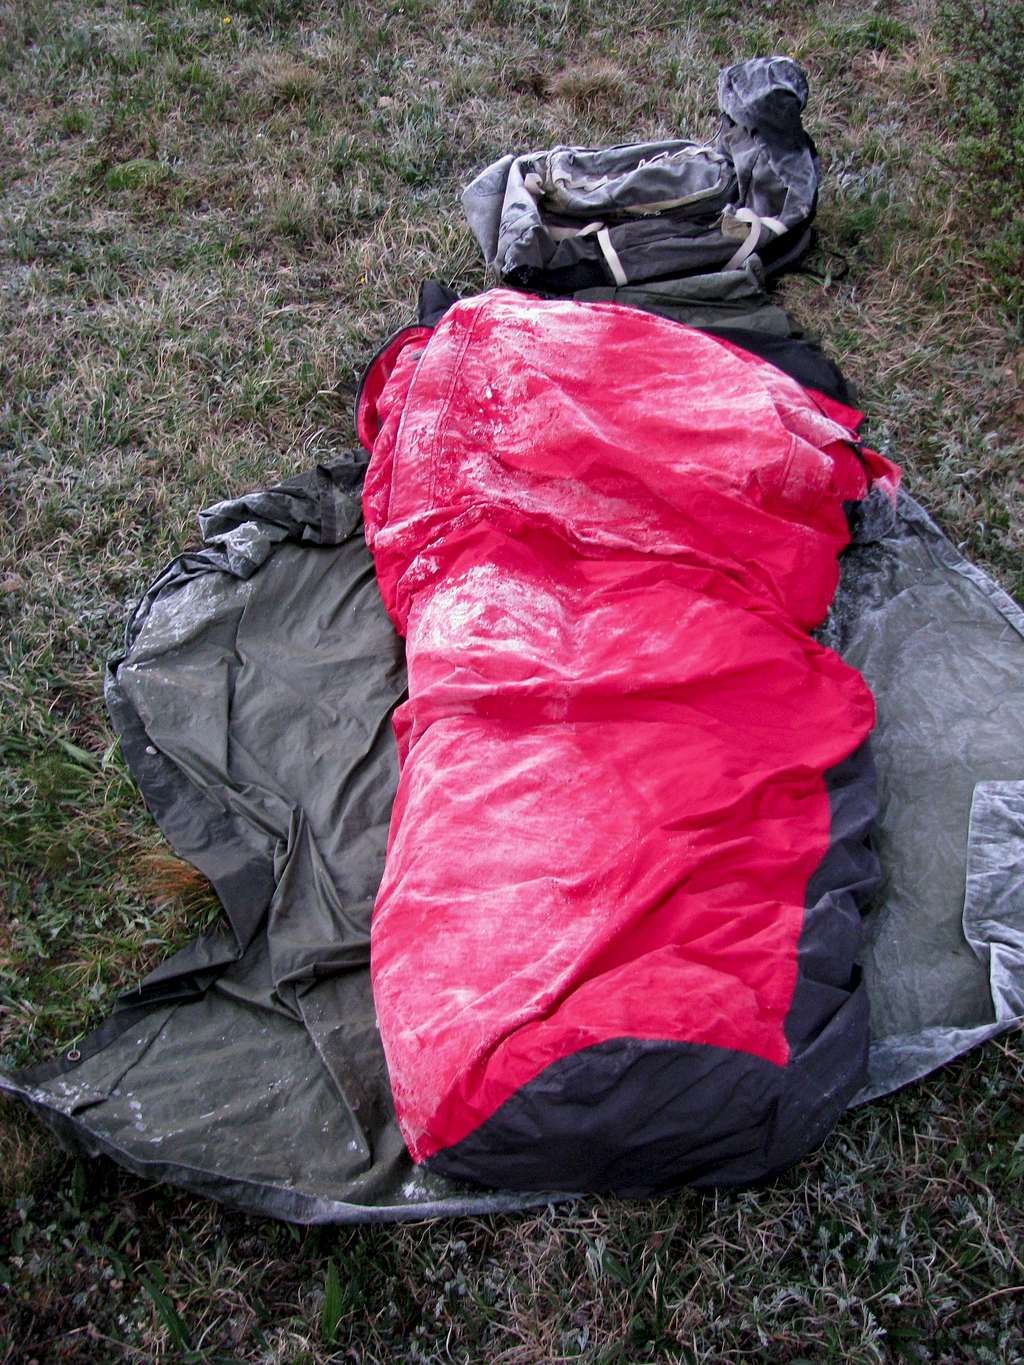 It is still cold at 12,000 ft end of June - my ice covered bivouc sack